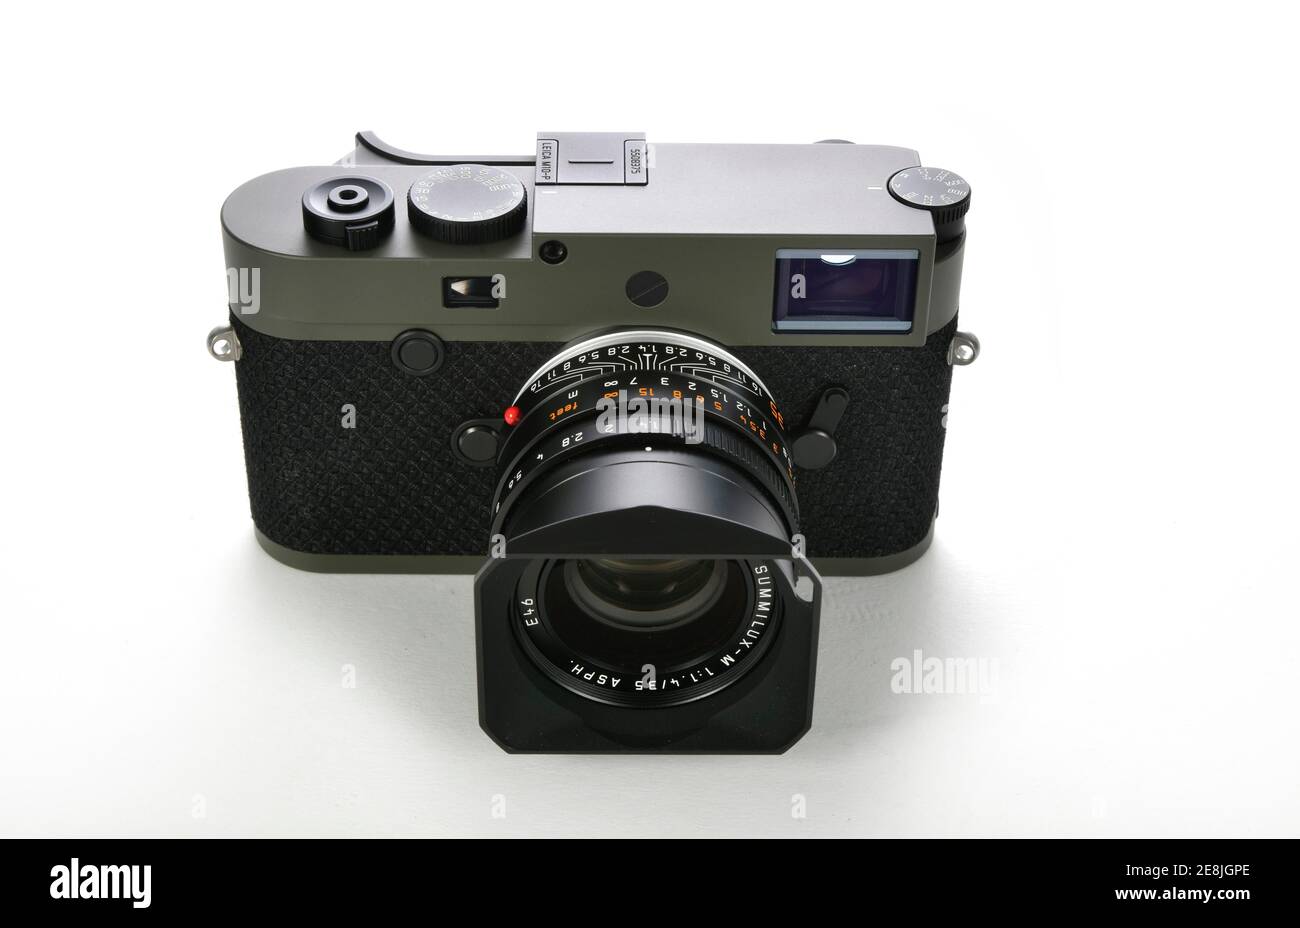 2021 introduced special limited edition Leica M10-P Reporter with bulletproof Kevlar coating, Germany Stock Photo